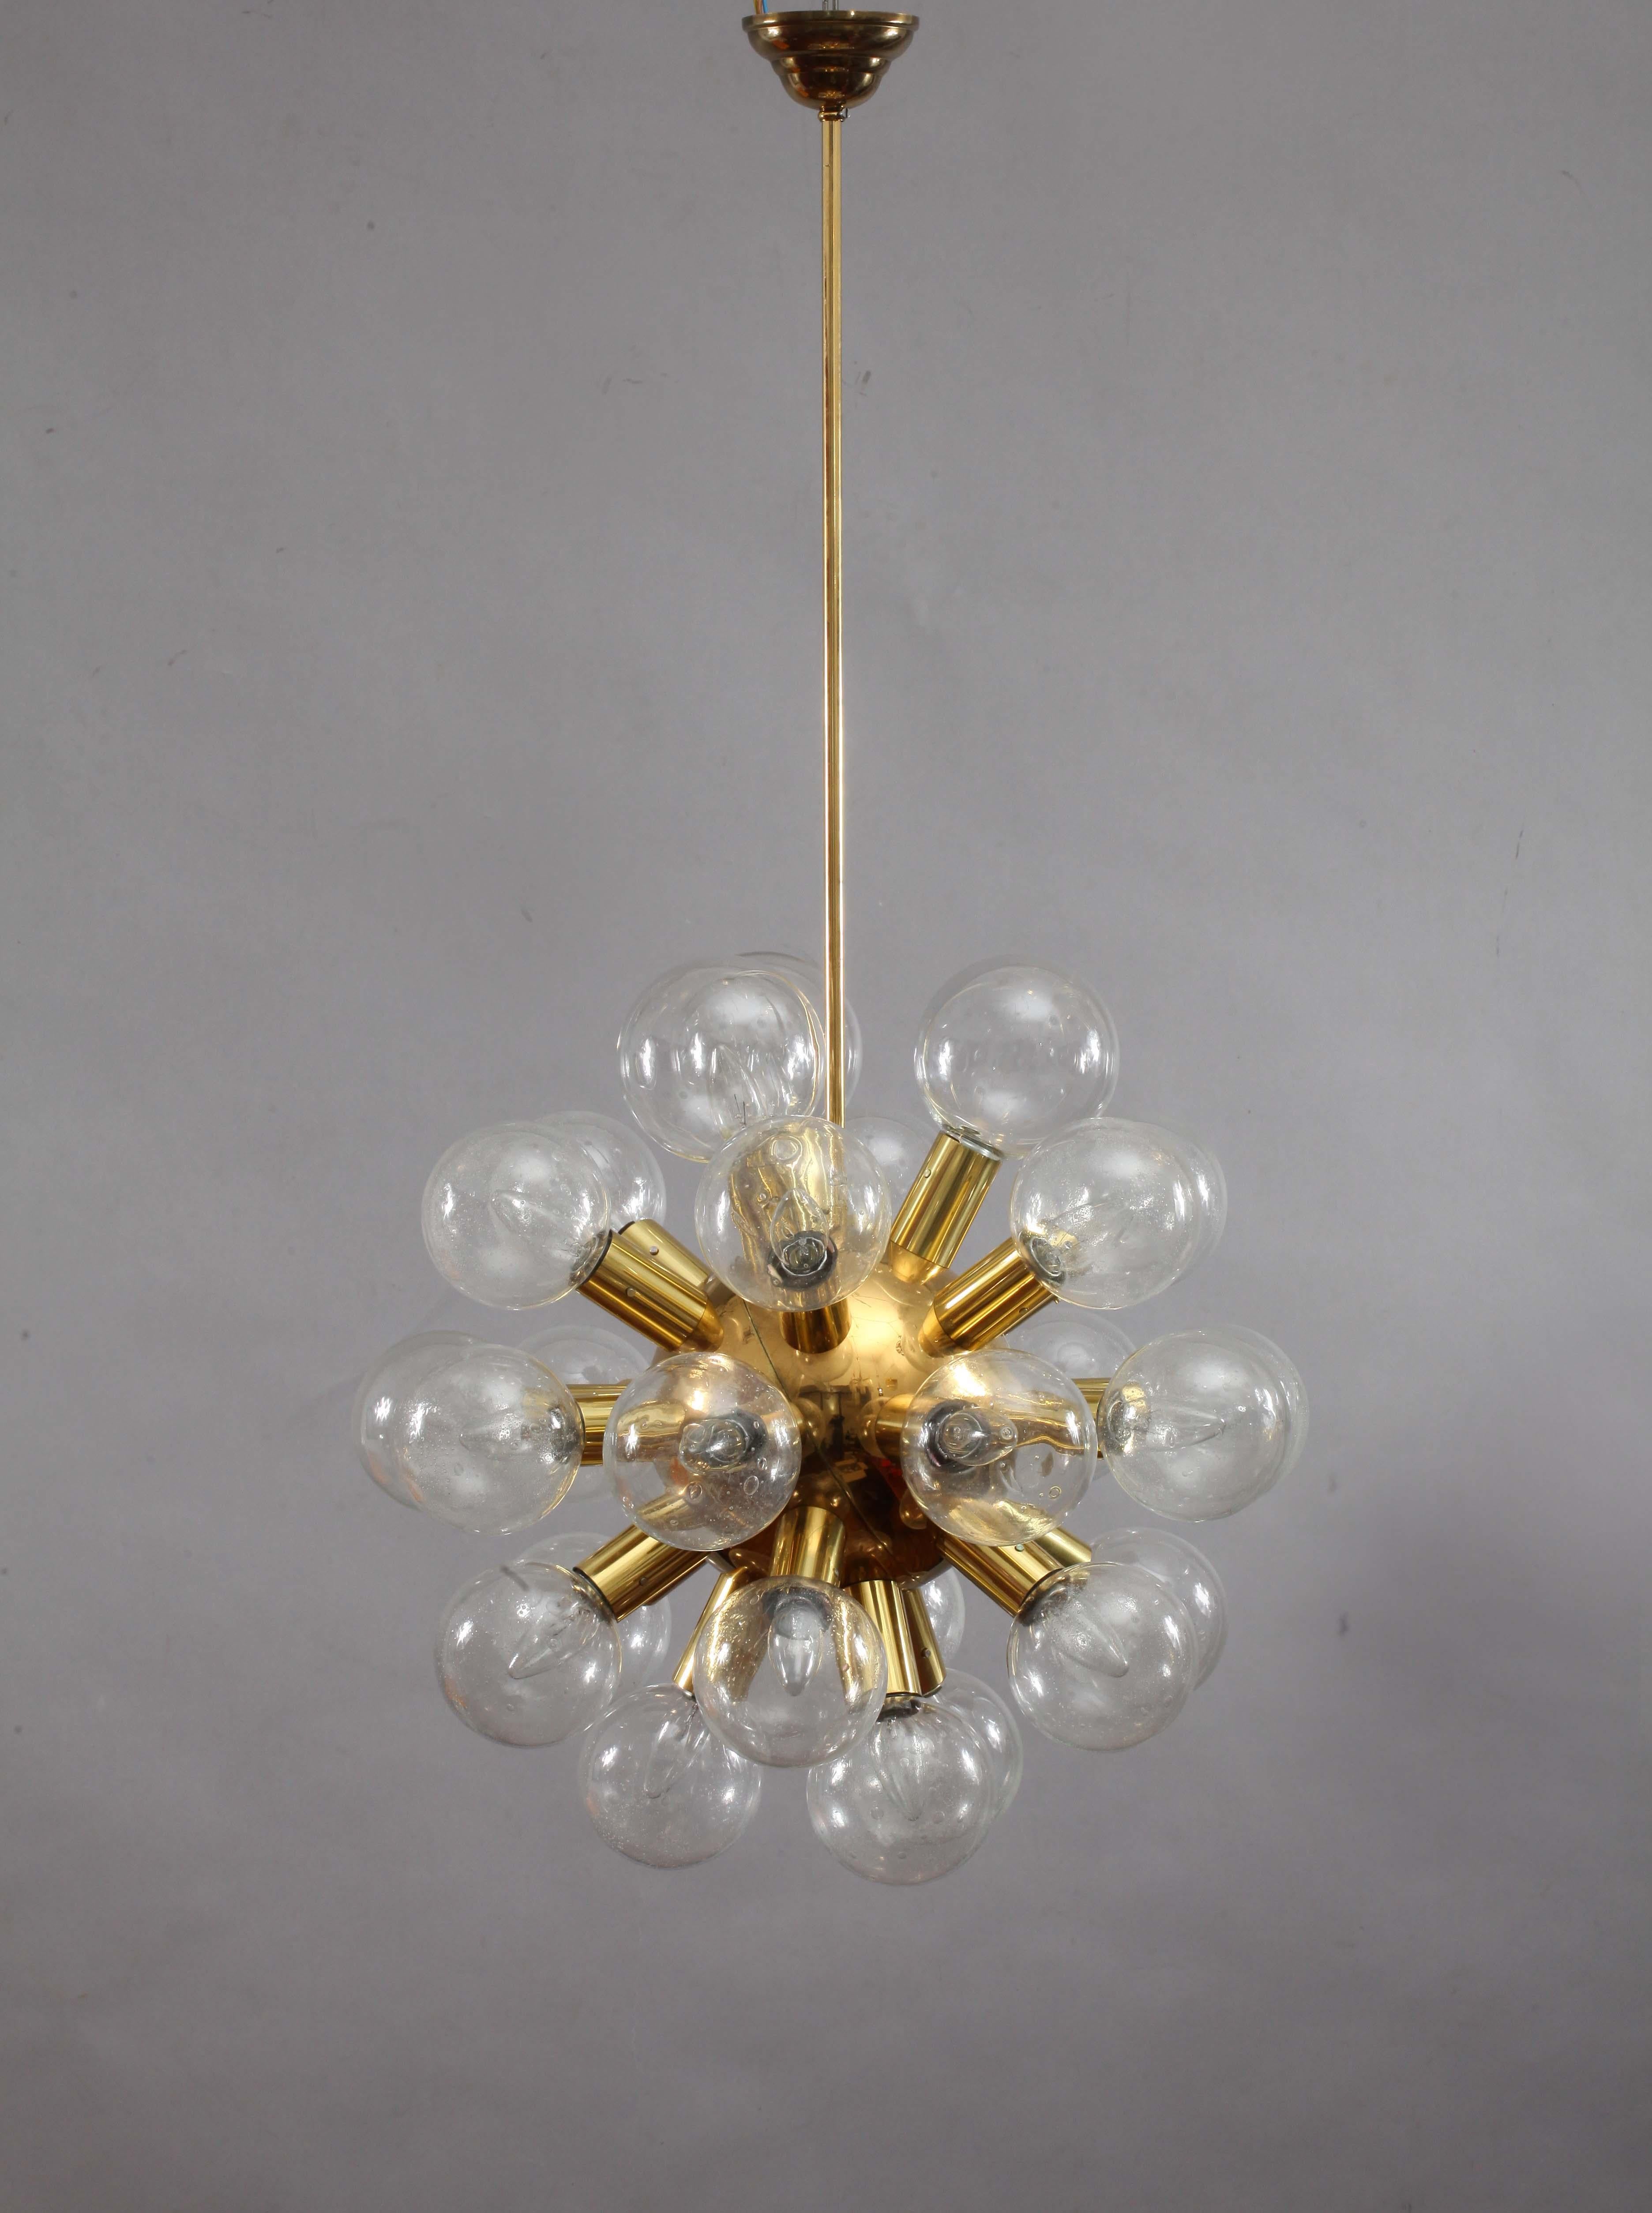 One 27-arm atomic chandeliers or pendant lights model 'RS 27 Kugel HL' by J.T. Kalmar, Austria, manufactured in midcentury, circa 1970 (late 1960s or early 1970s).
They are made of polished brass and 27 hand blown bubble glass lamp shades with a